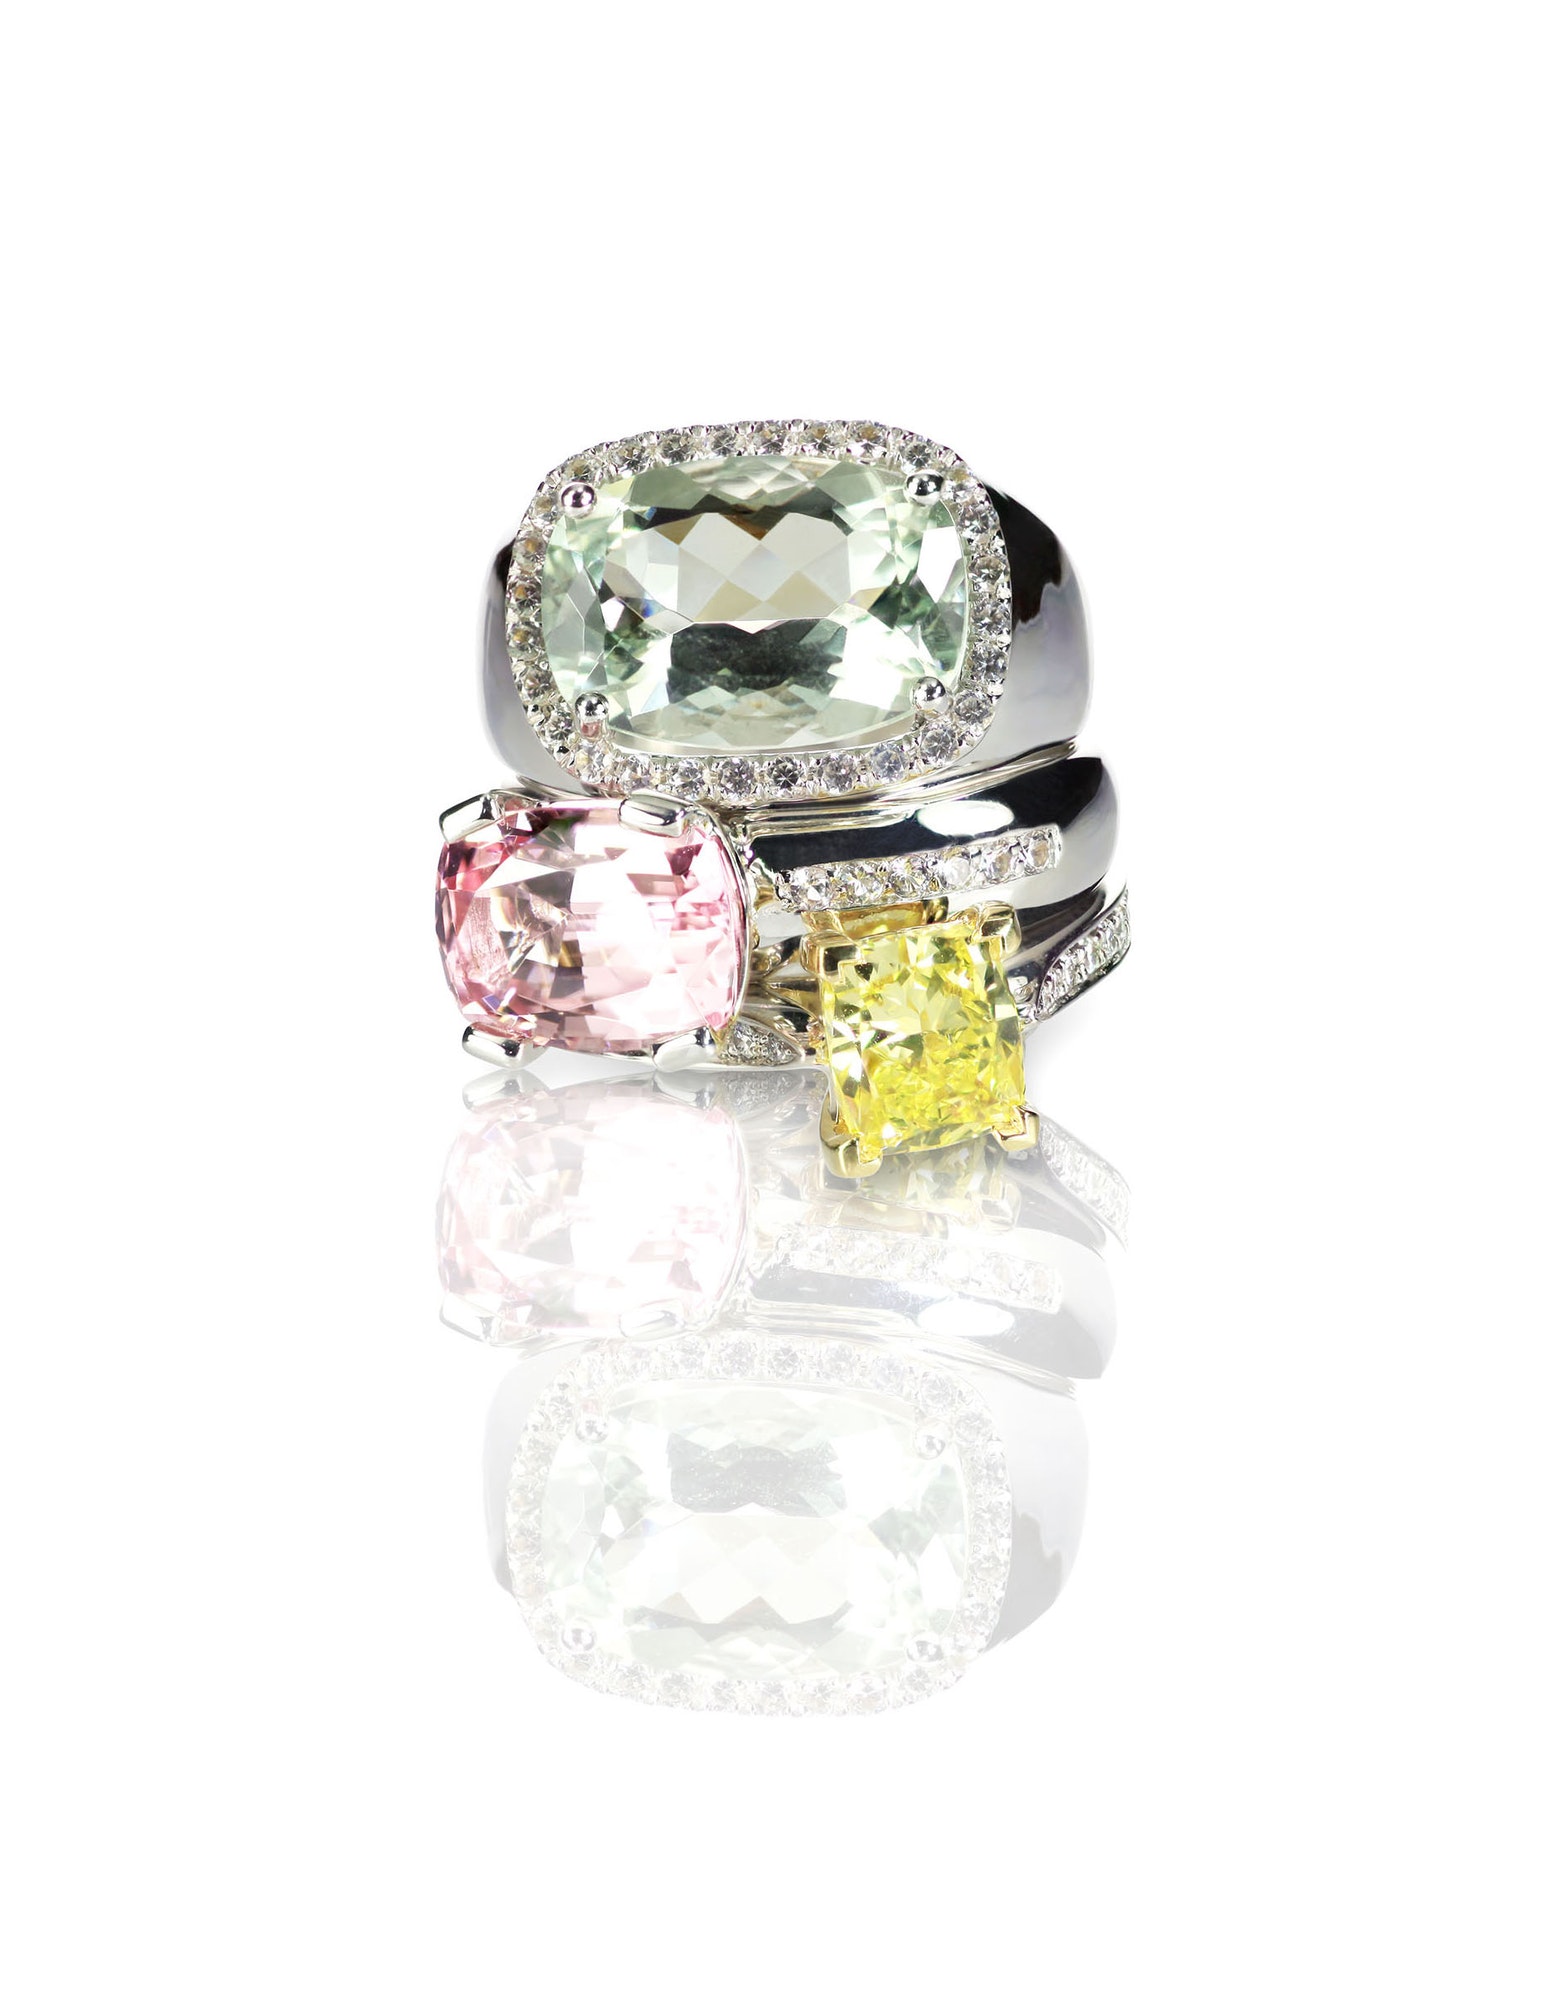 Grouping of colored gemstone diamond rings stacked